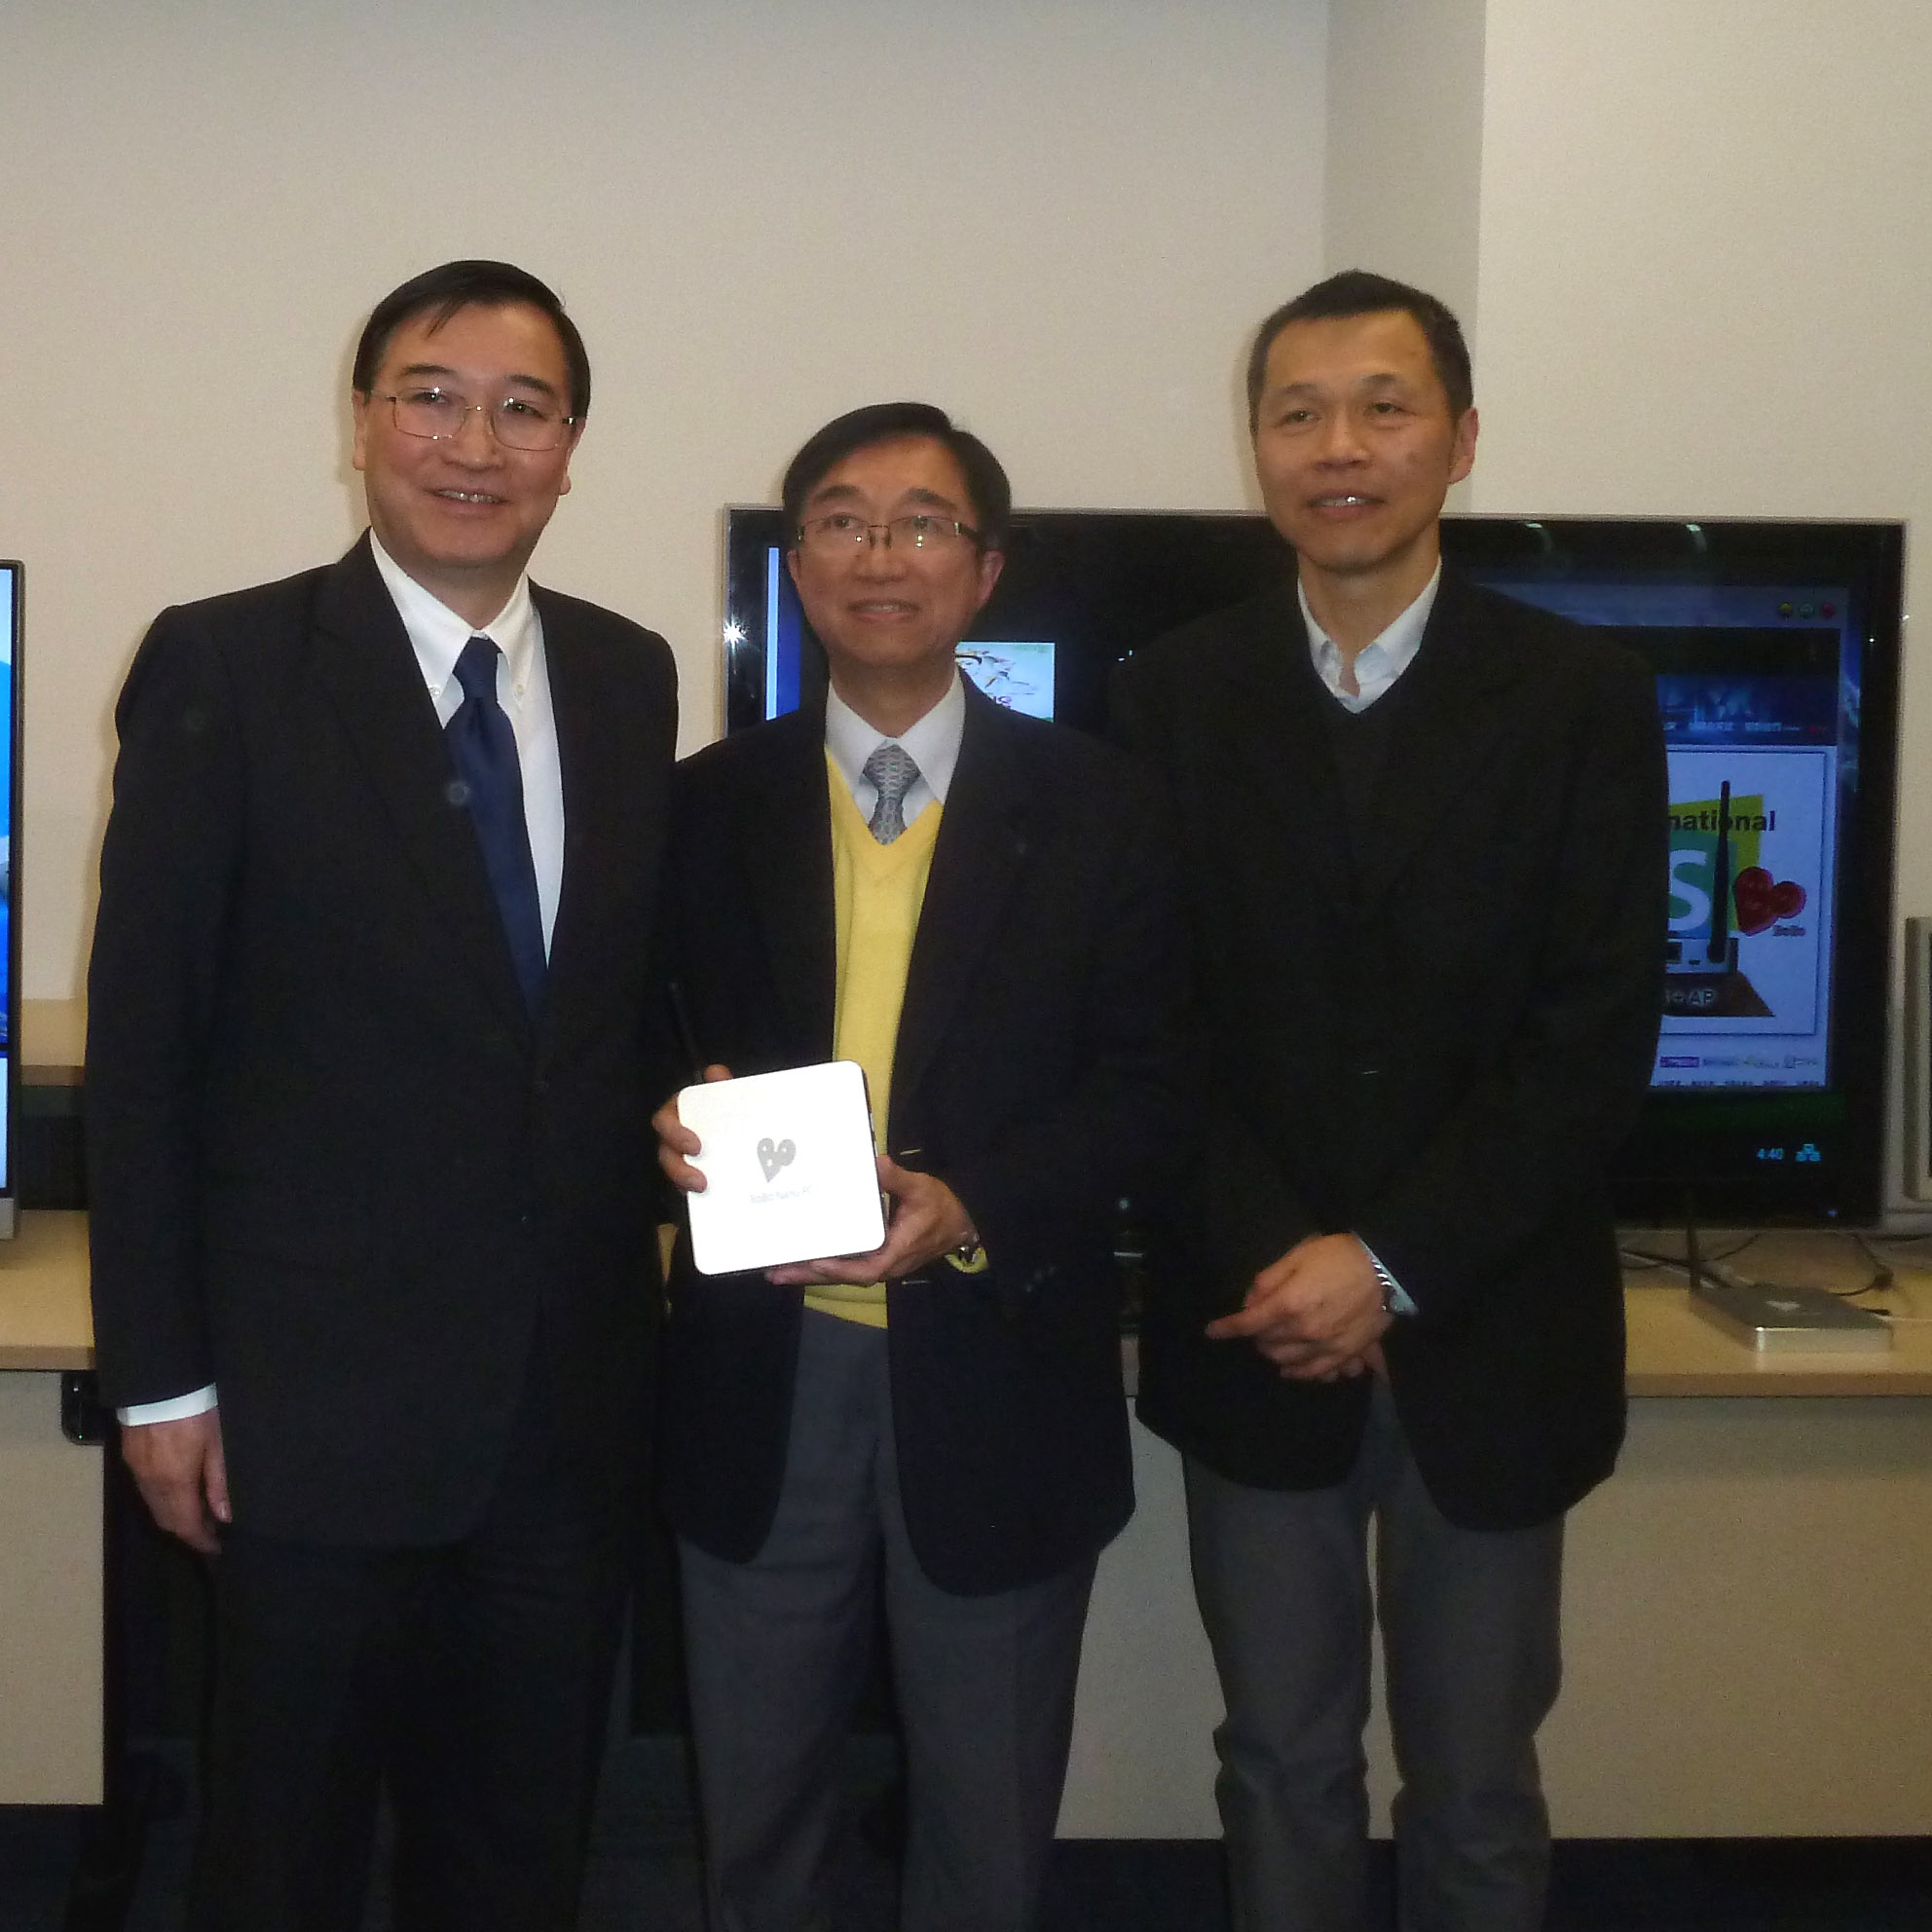 From left to right: Dr. Nim Kwan Cheung, CEO of ASTRI, Mr. Alan Kan, Dr. Jau Liu, Director of ECE, ASTRI